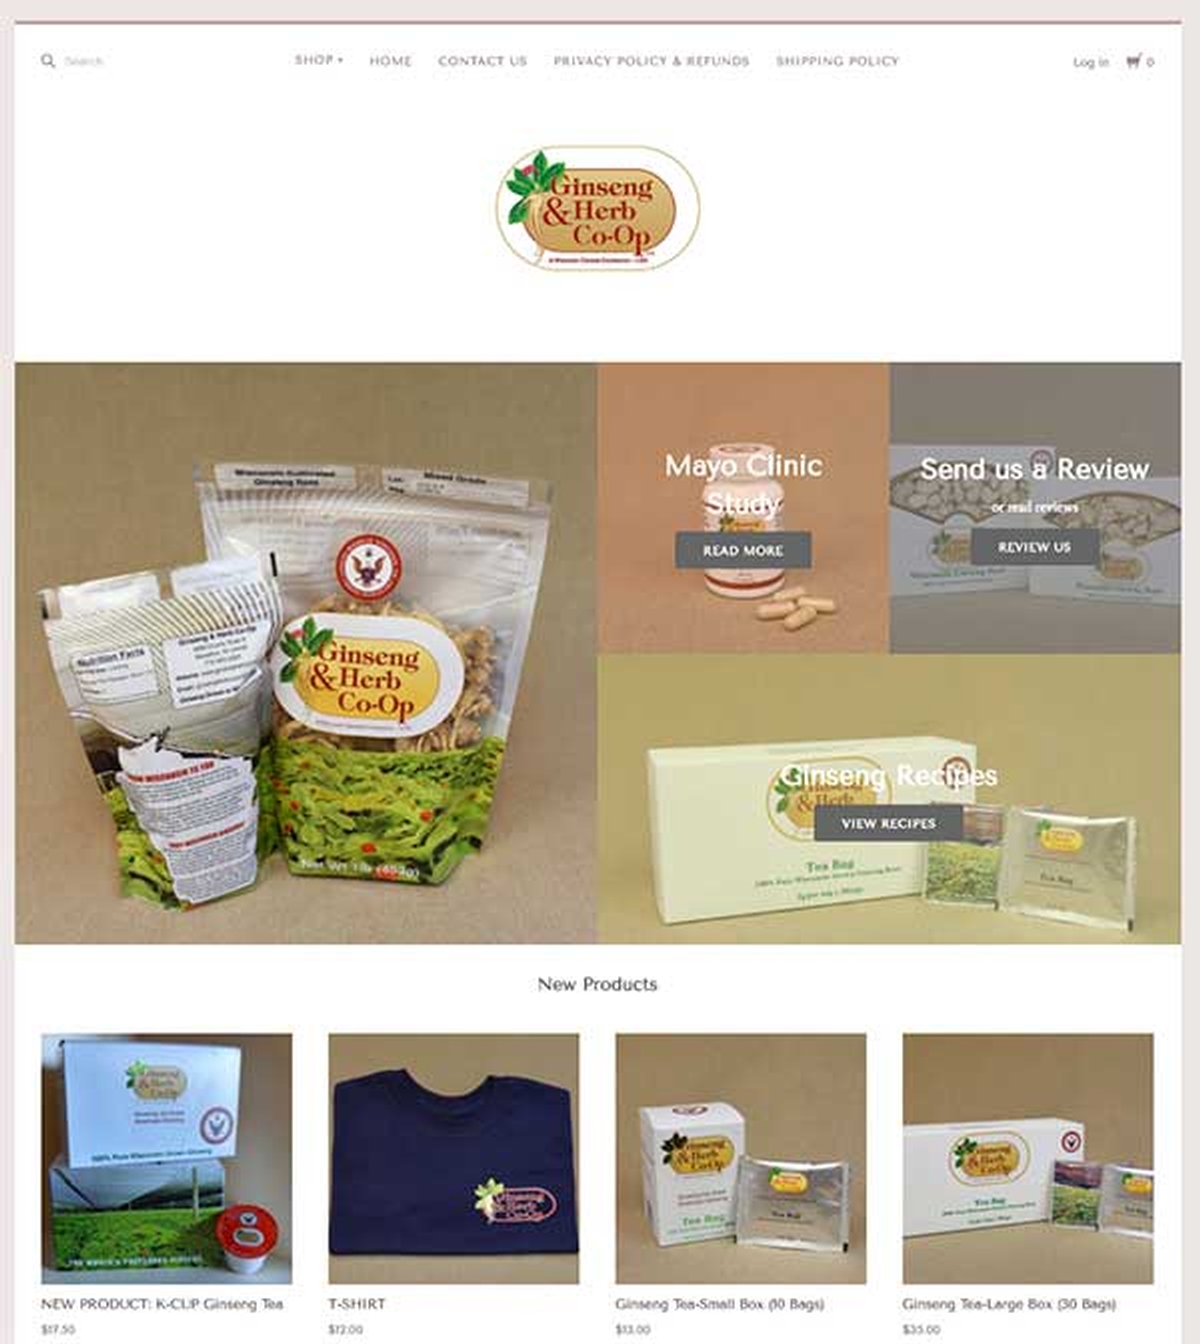 Virtual Vision Recently updated Ginseng & Herb Co-Op with a new look